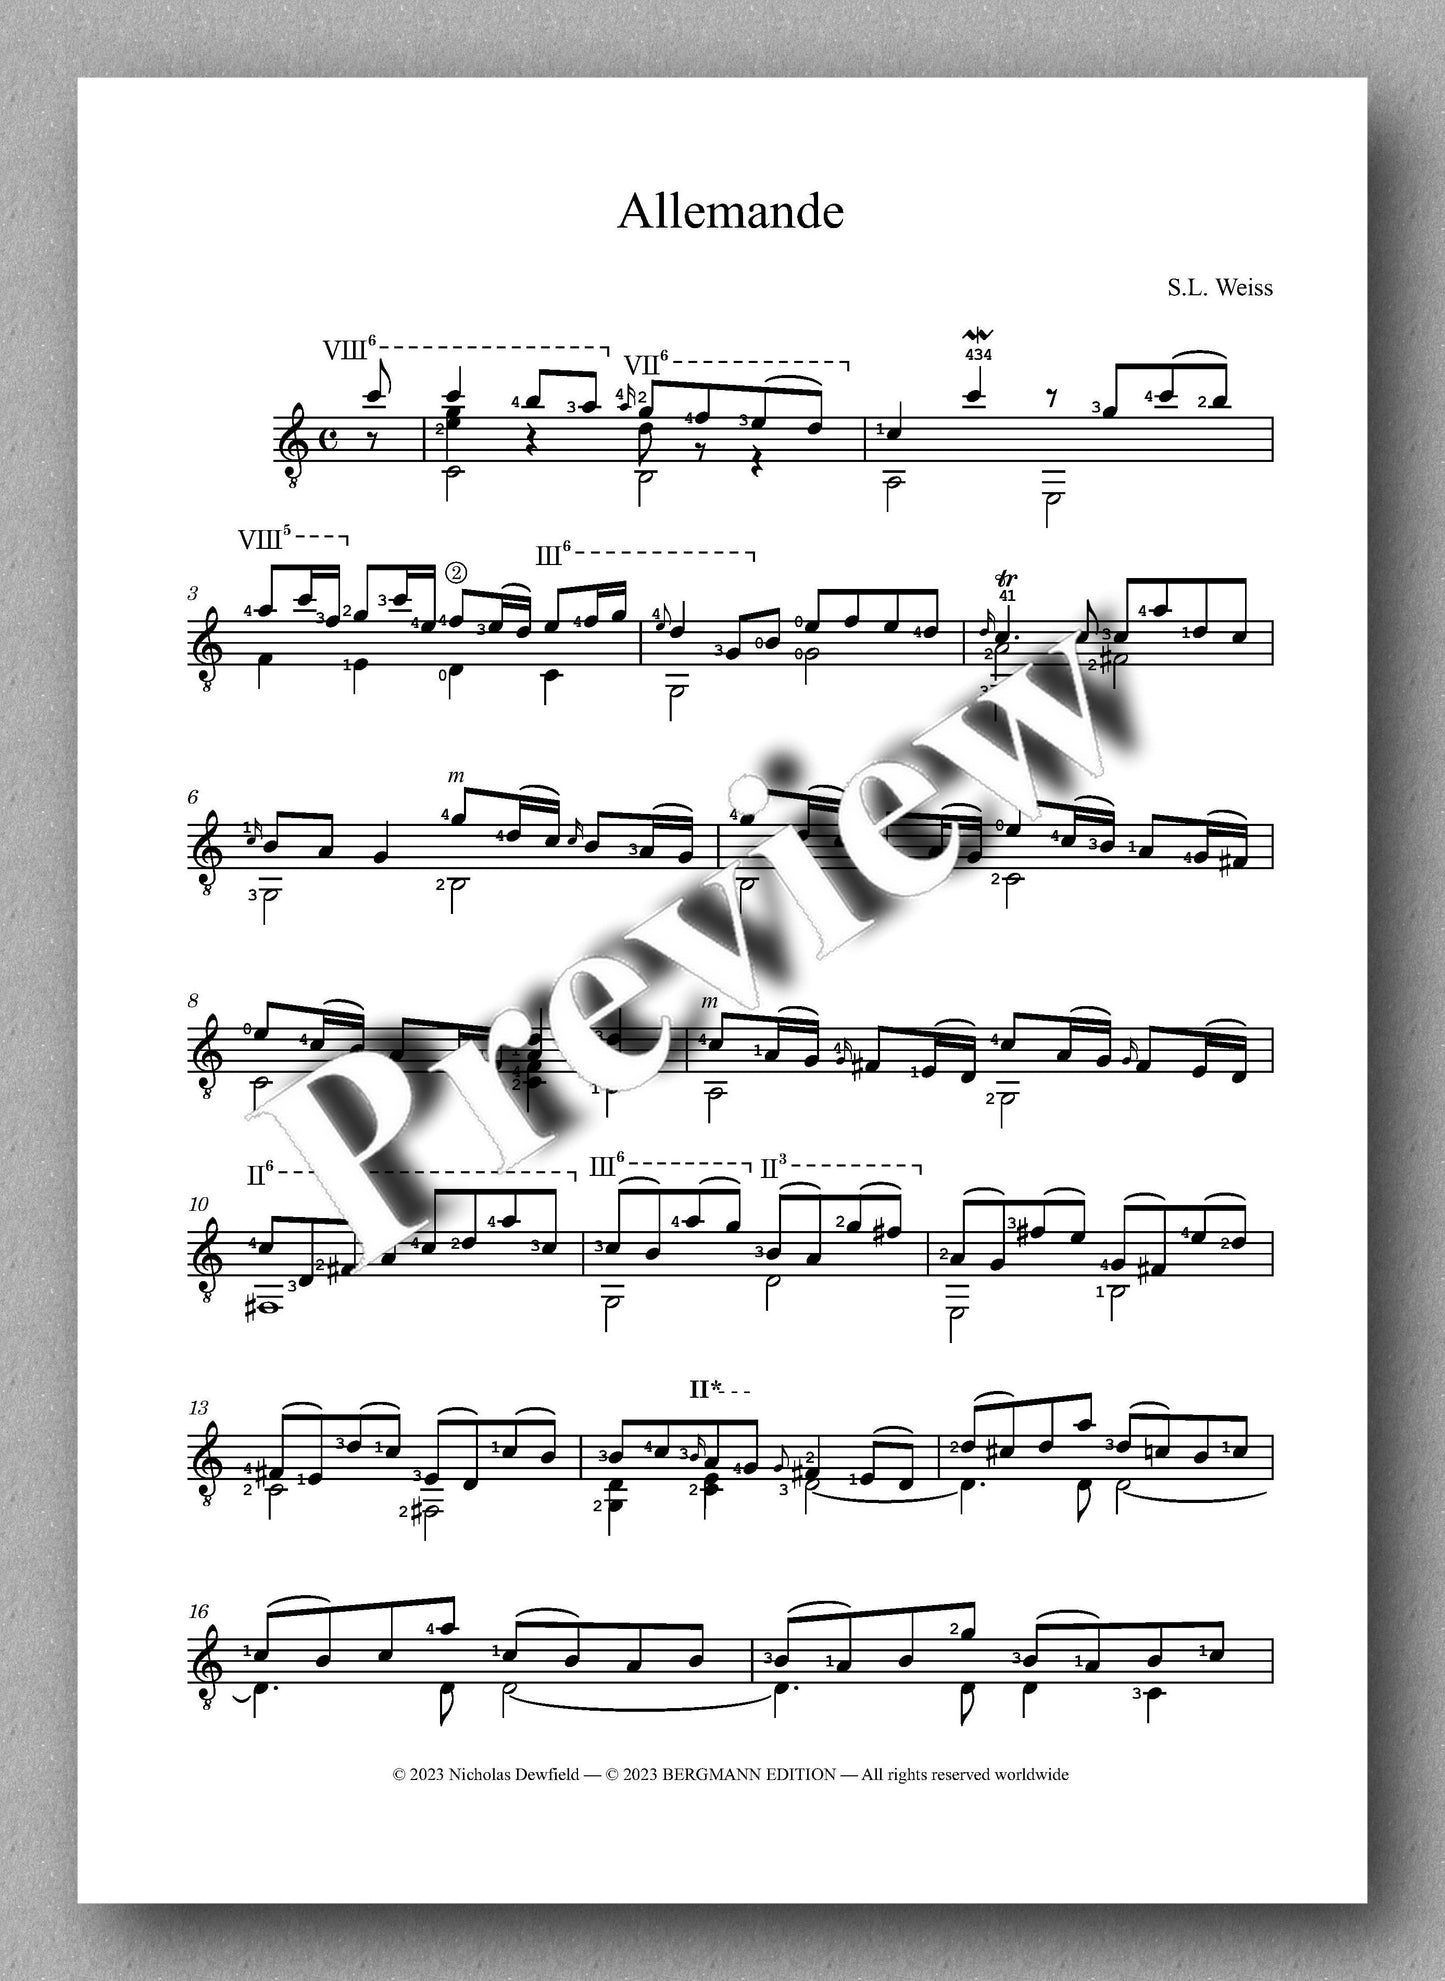 Sylvius Leopold Weiss (1687-1750), Sonata No. 17 - preview of the cover - Sylvius Leopold Weiss (1687-1750), Sonata No. 17 - preview of the allemande